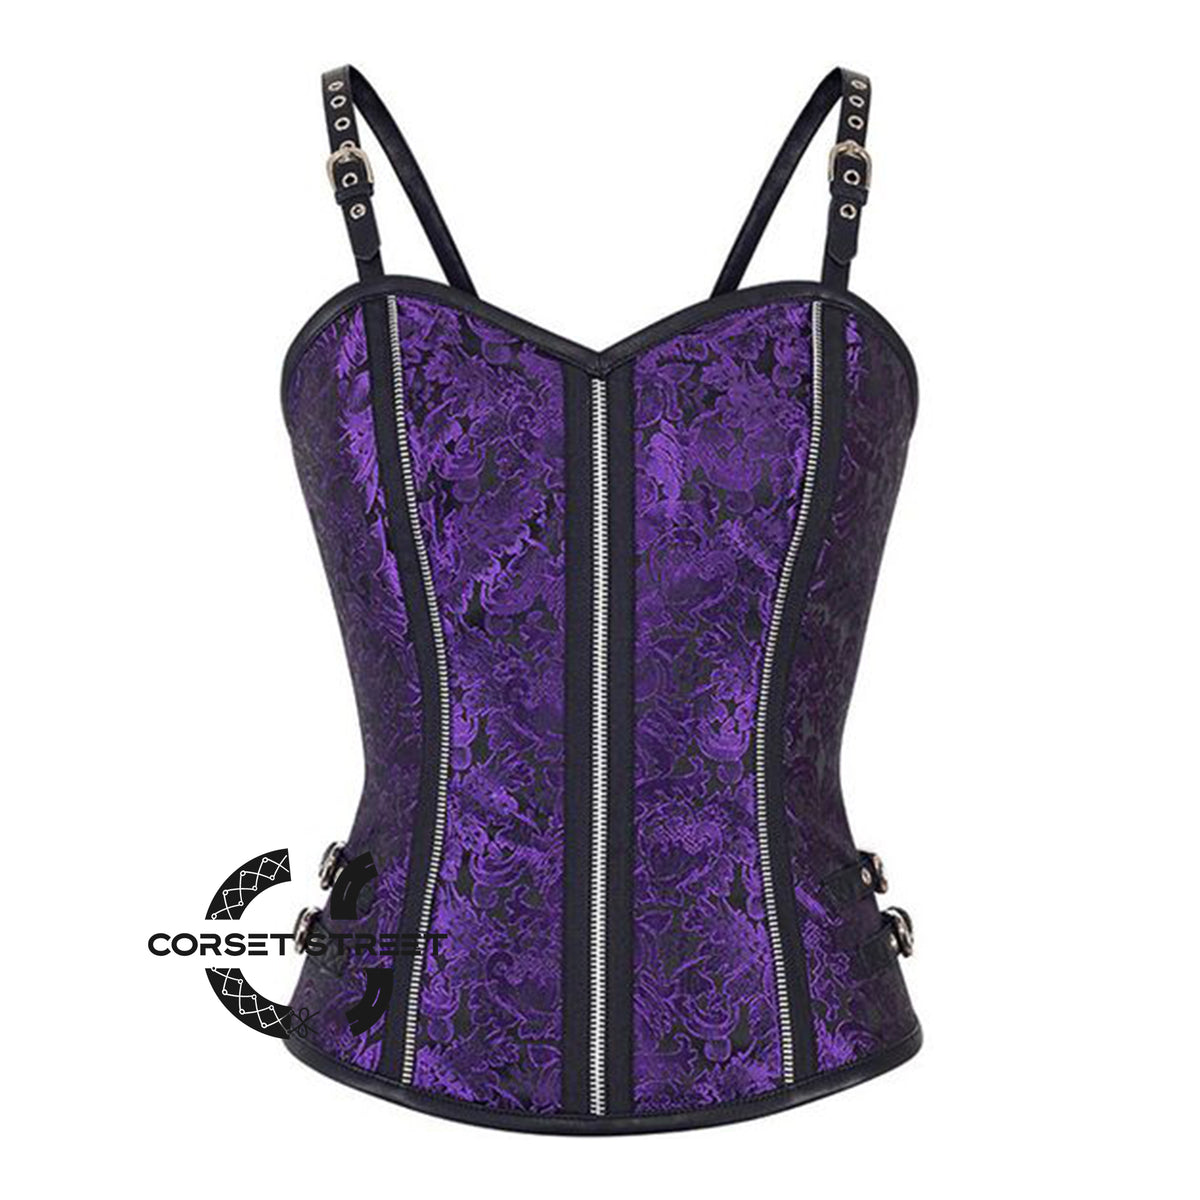 Purple Black Brocade With Leather Strap Overbust Corset